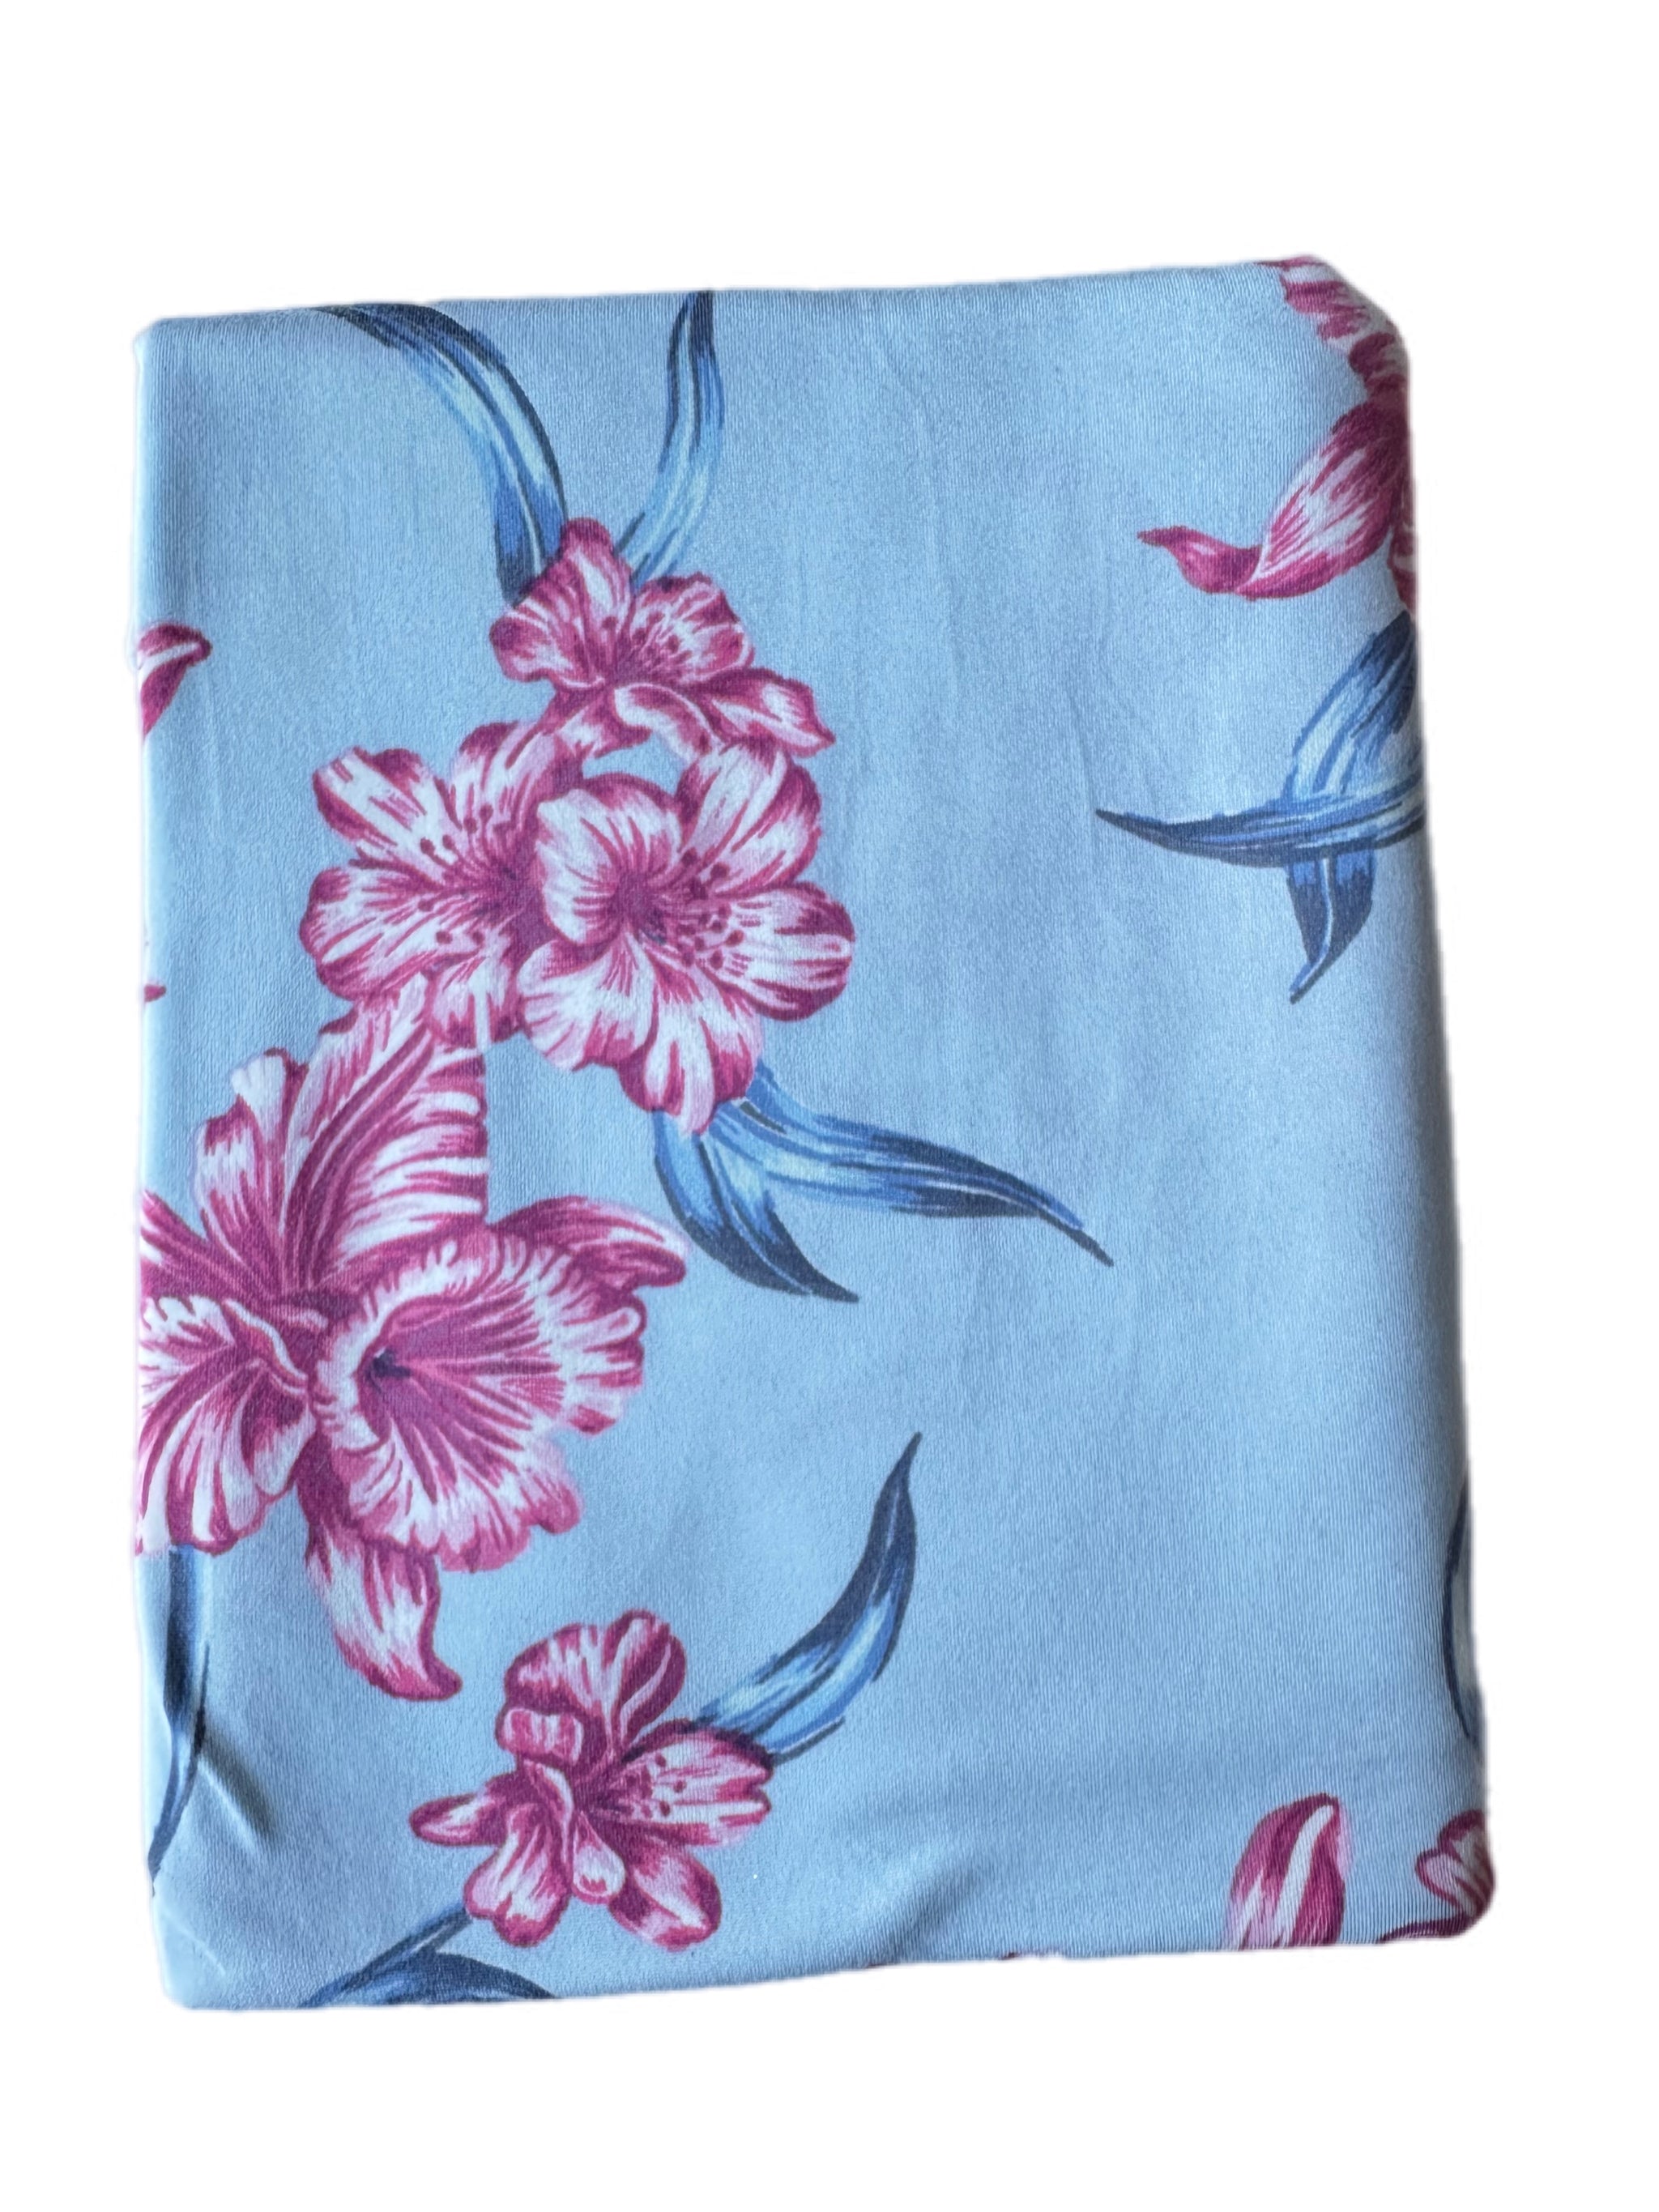 Floral Knit Dty Brushed Polyester Knit Spandex Fabric- DTYBRUSHF8138  Blue-Fuschia - Fabrics by the Yard